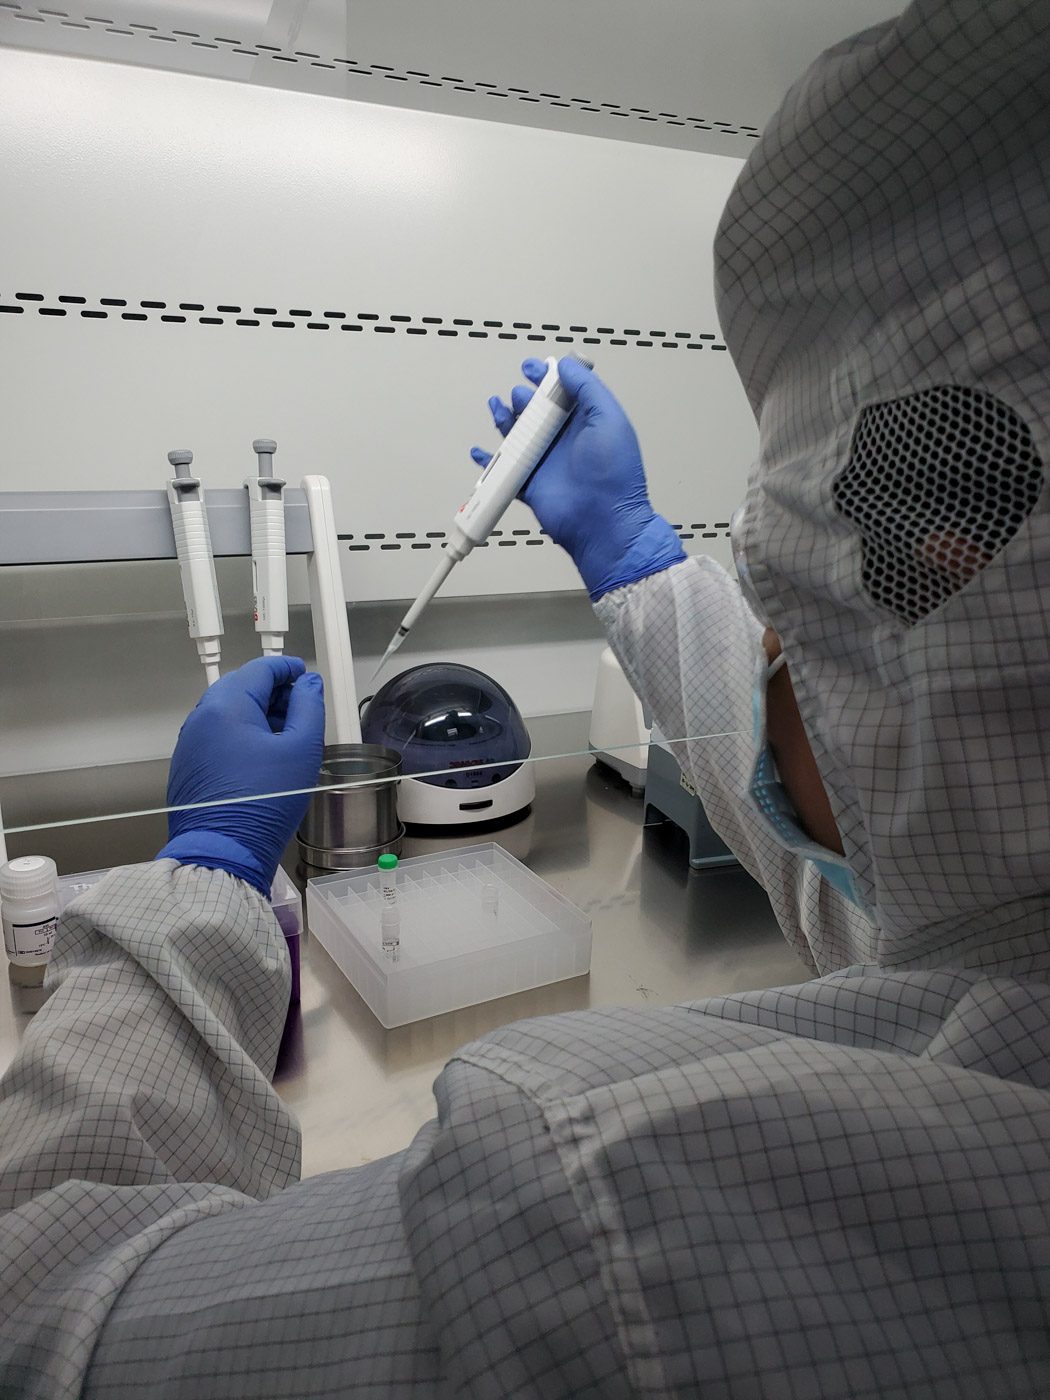 FILE PHOTO: The Detoxicare Molecular Diagnostics Lab in Mandaluyong. For safety purposes, no photos were taken during actual processing of COVID-19 swabs. Photo courtesy of Detoxicare Molecular Diagnostics Lab  